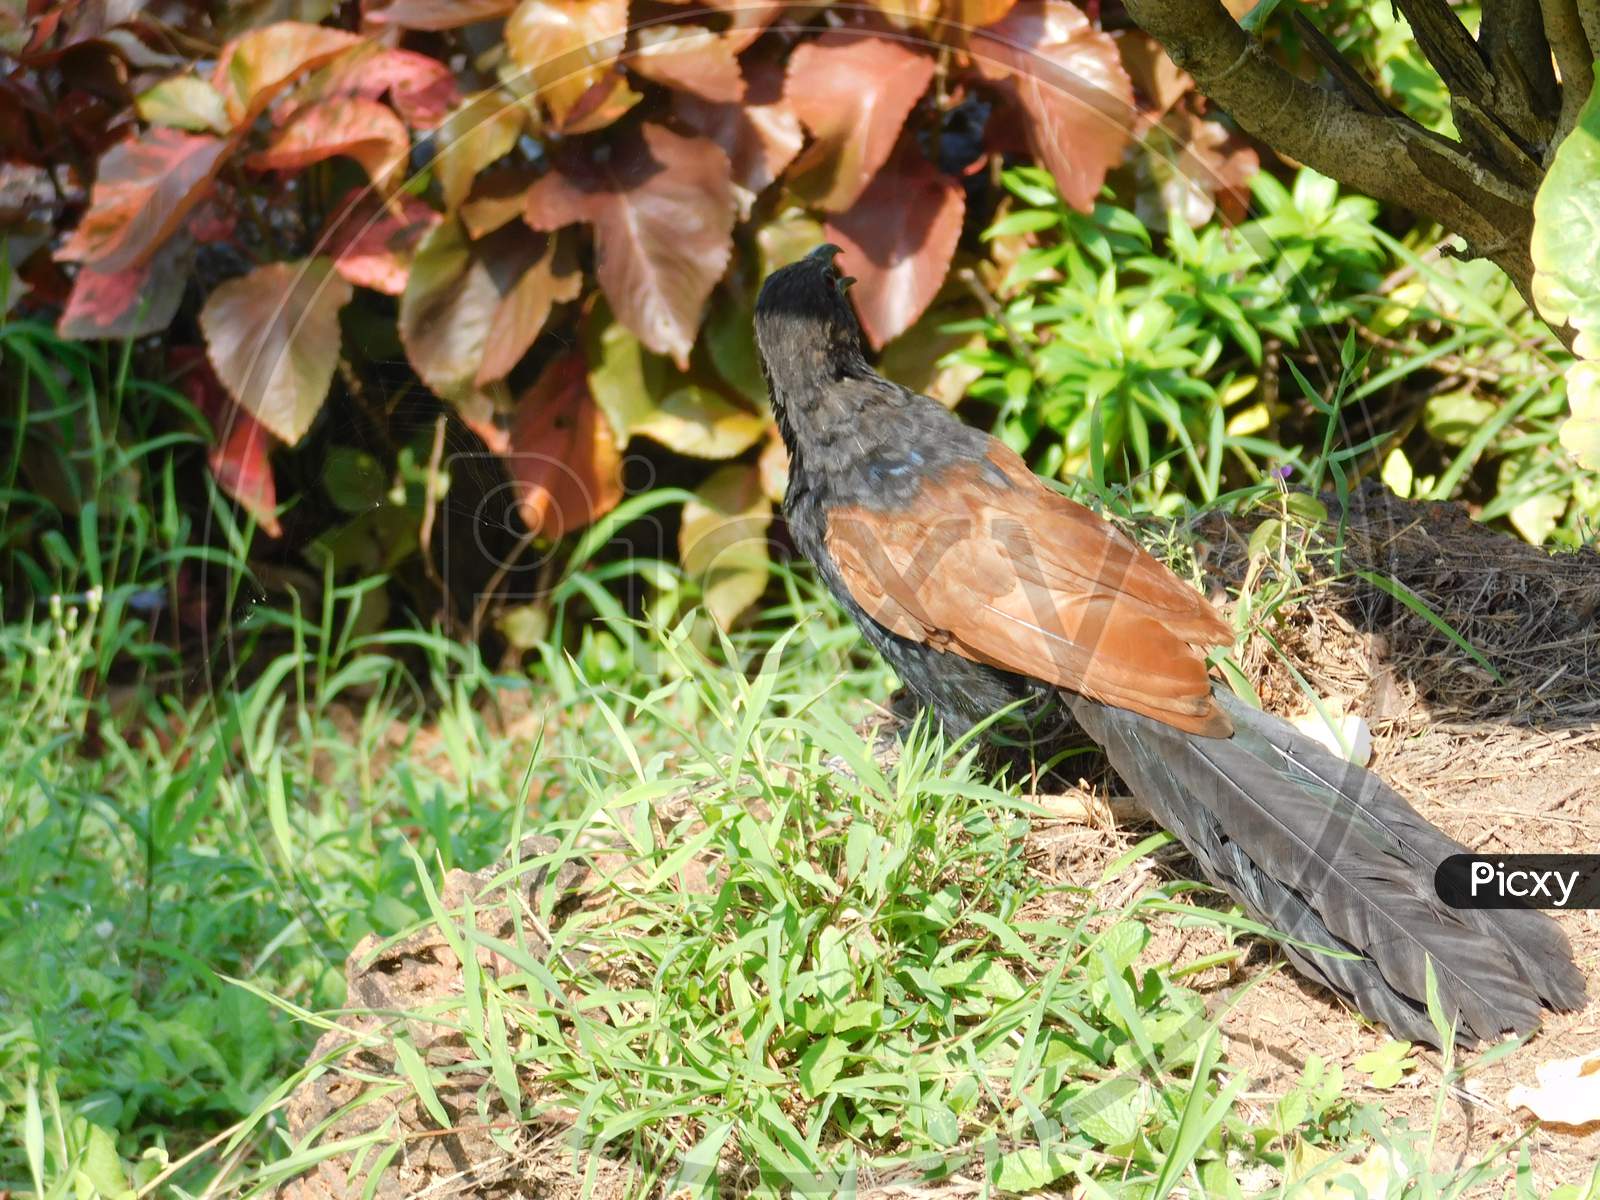 A Greater coucal bird looking for something inside a garden